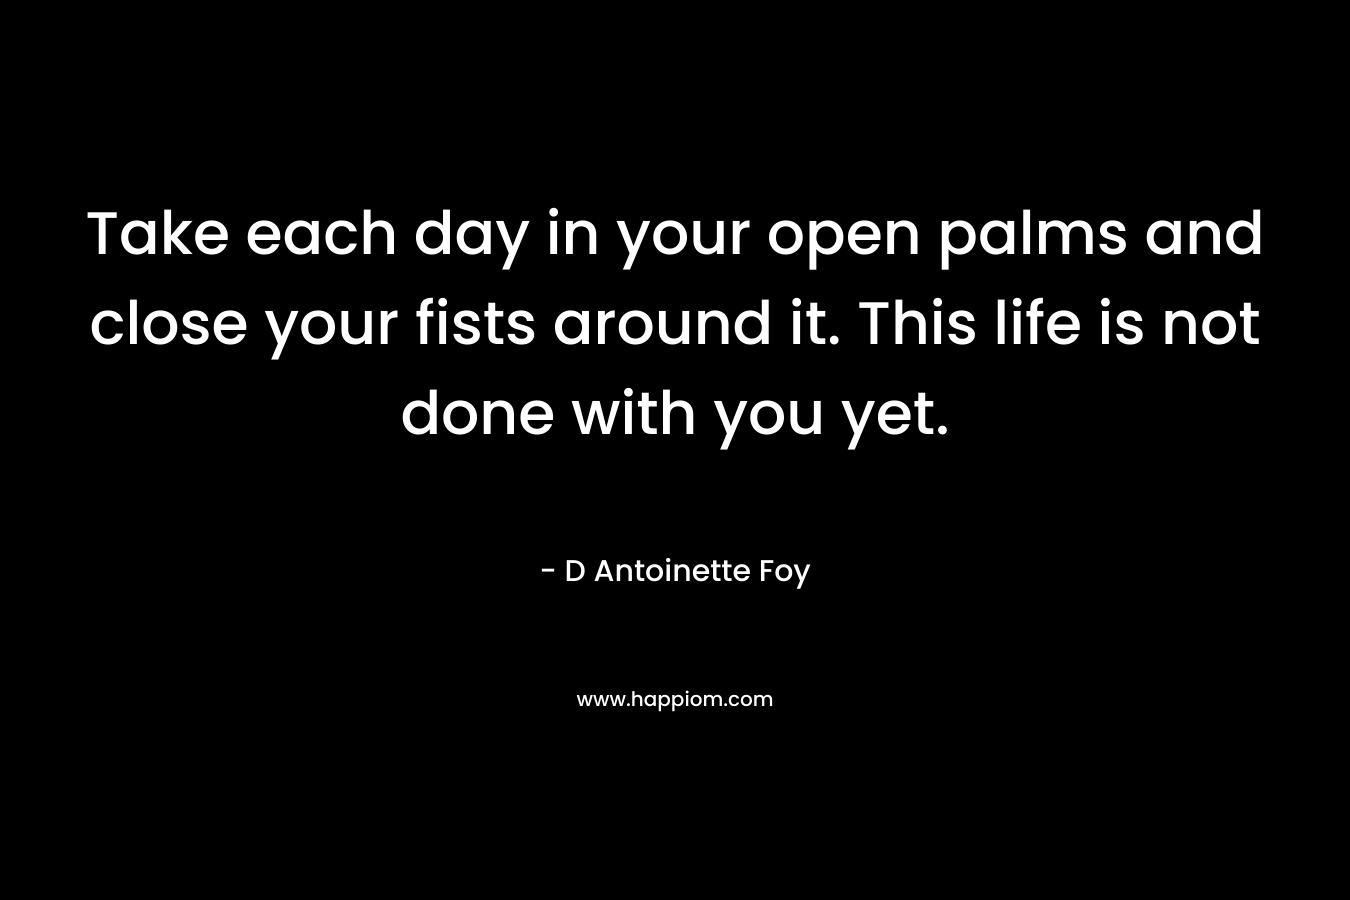 Take each day in your open palms and close your fists around it. This life is not done with you yet. – D Antoinette Foy